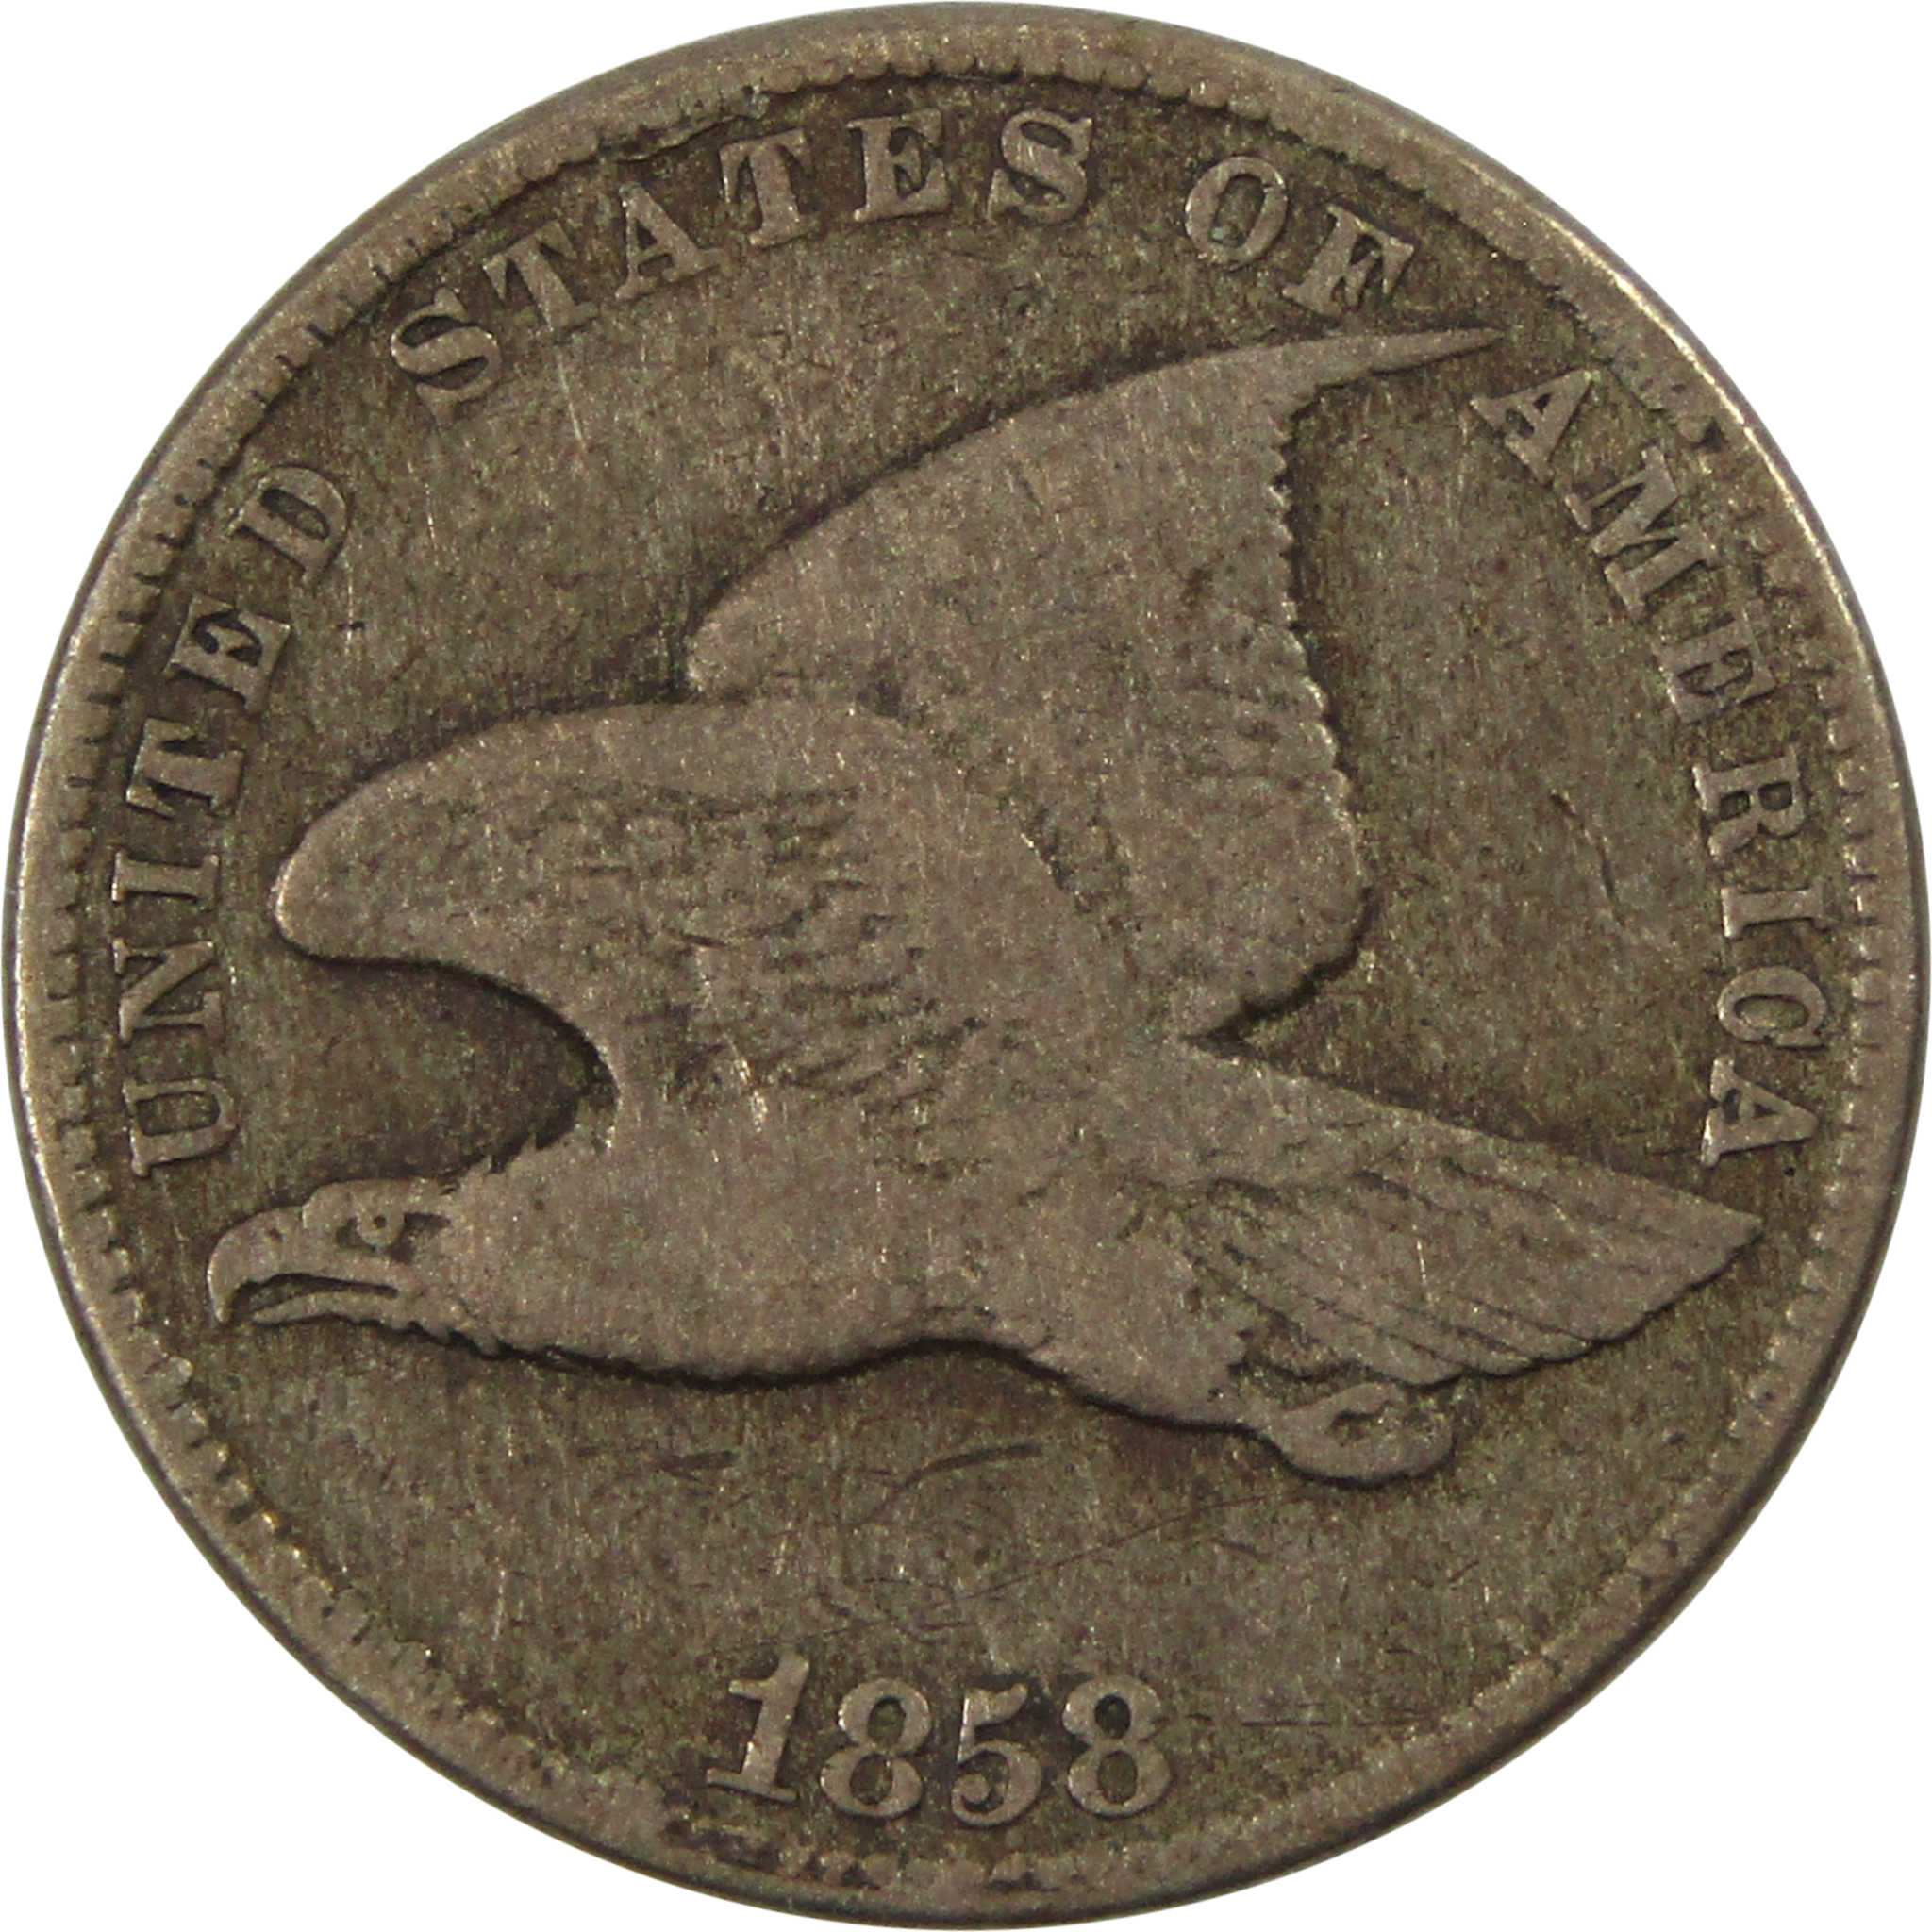 1858 Small Letters Flying Eagle Cent F Fine Copper-Nickel SKU:I13826